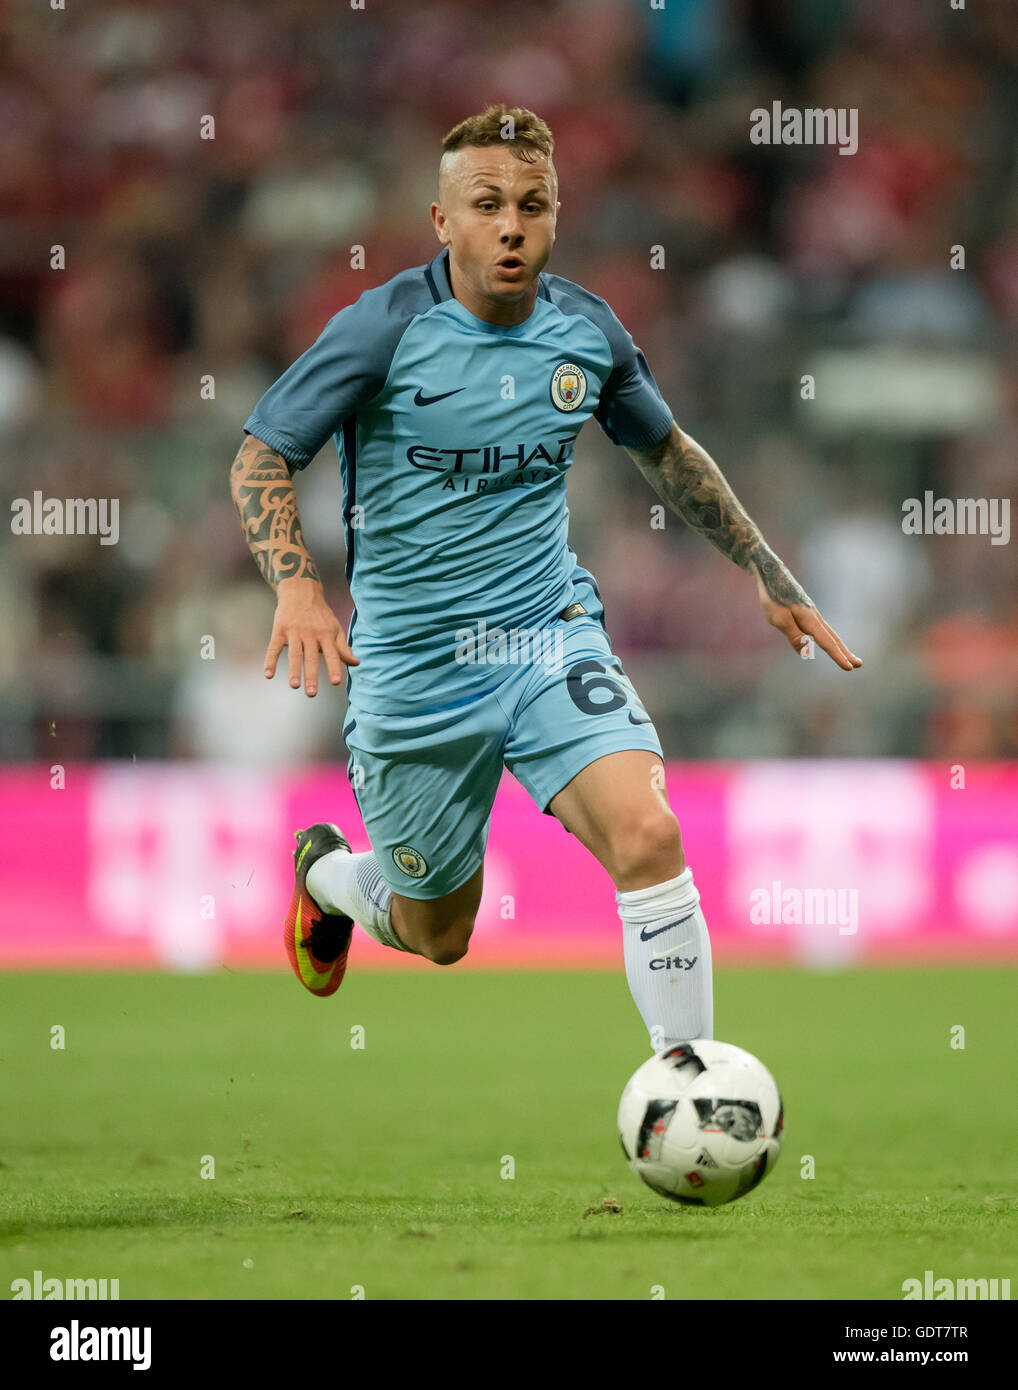 Munich, Germany. 20th July, 2016. Manchester's Angelino (Jose Angel Esmoris Tasende) in action during an international soccer friendly match between FC Bayern Munich and Manchester City at the Allianz Arena in Munich, Germany, 20 July 2016. Photo: THOMAS EISENHUTH/dpa - NO WIRE SERVICE -/dpa/Alamy Live News Stock Photo